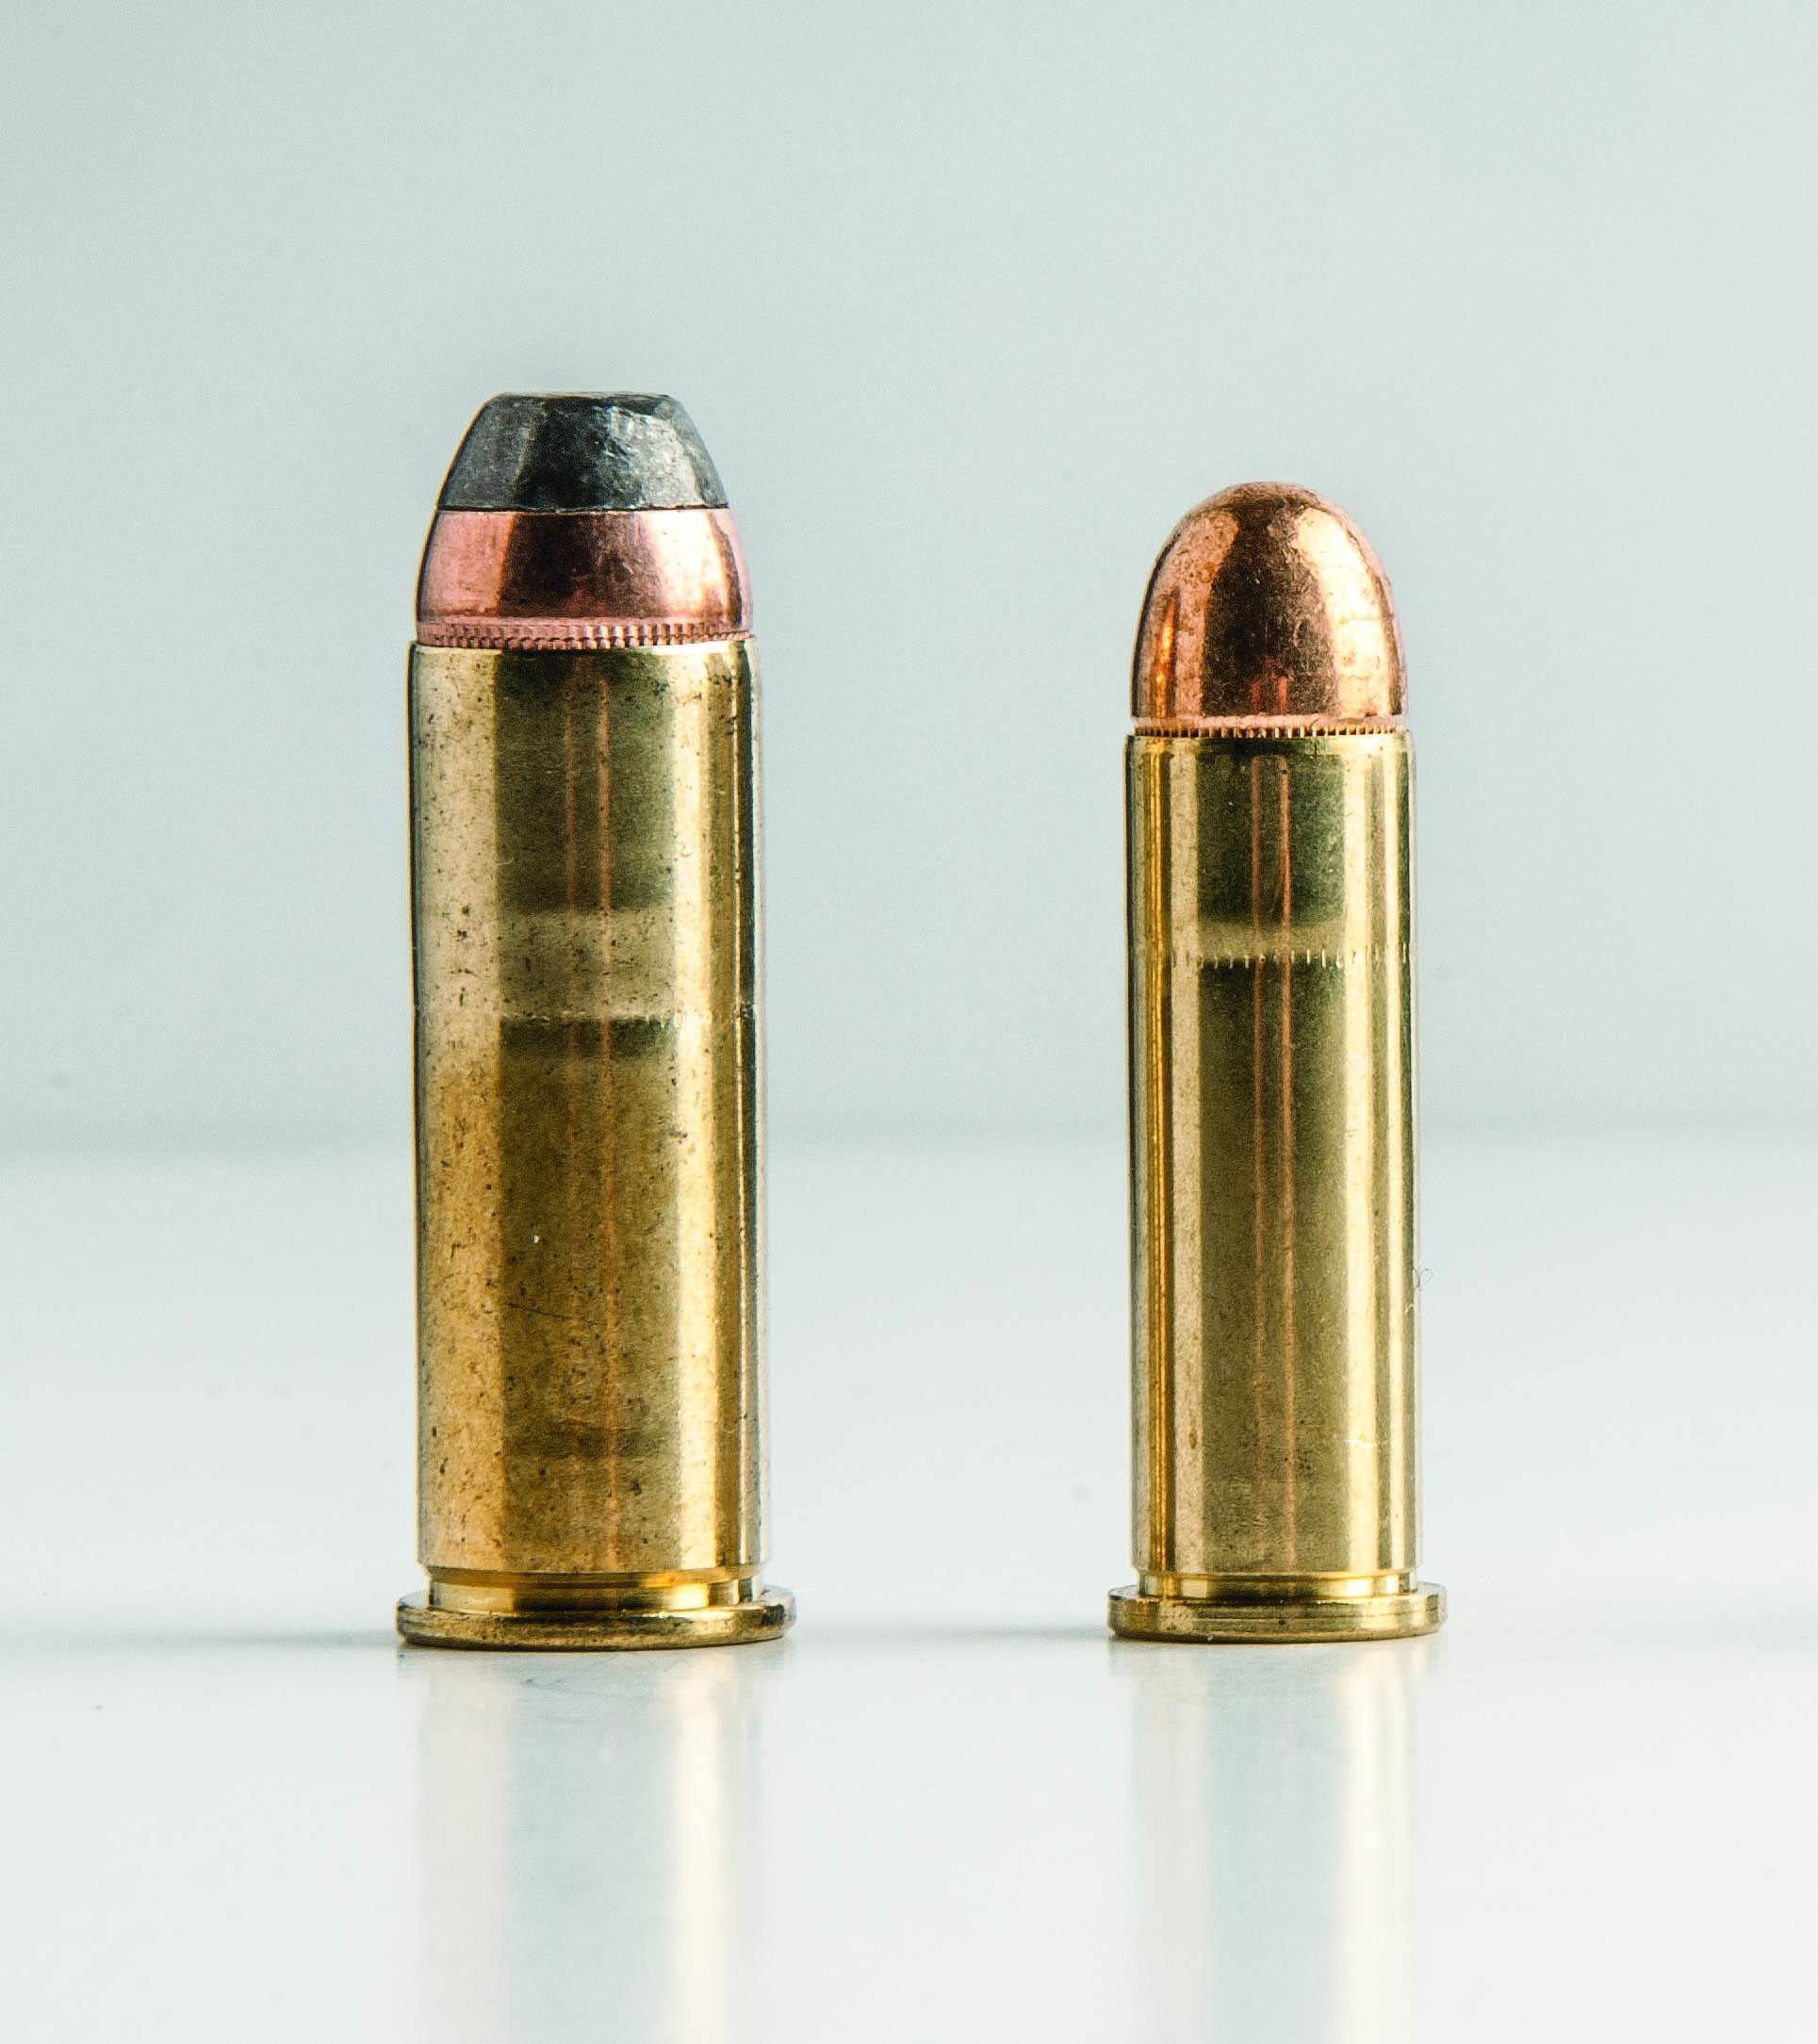 Six Reasons Why Modern Defensive Ammo Is Better Than Ever